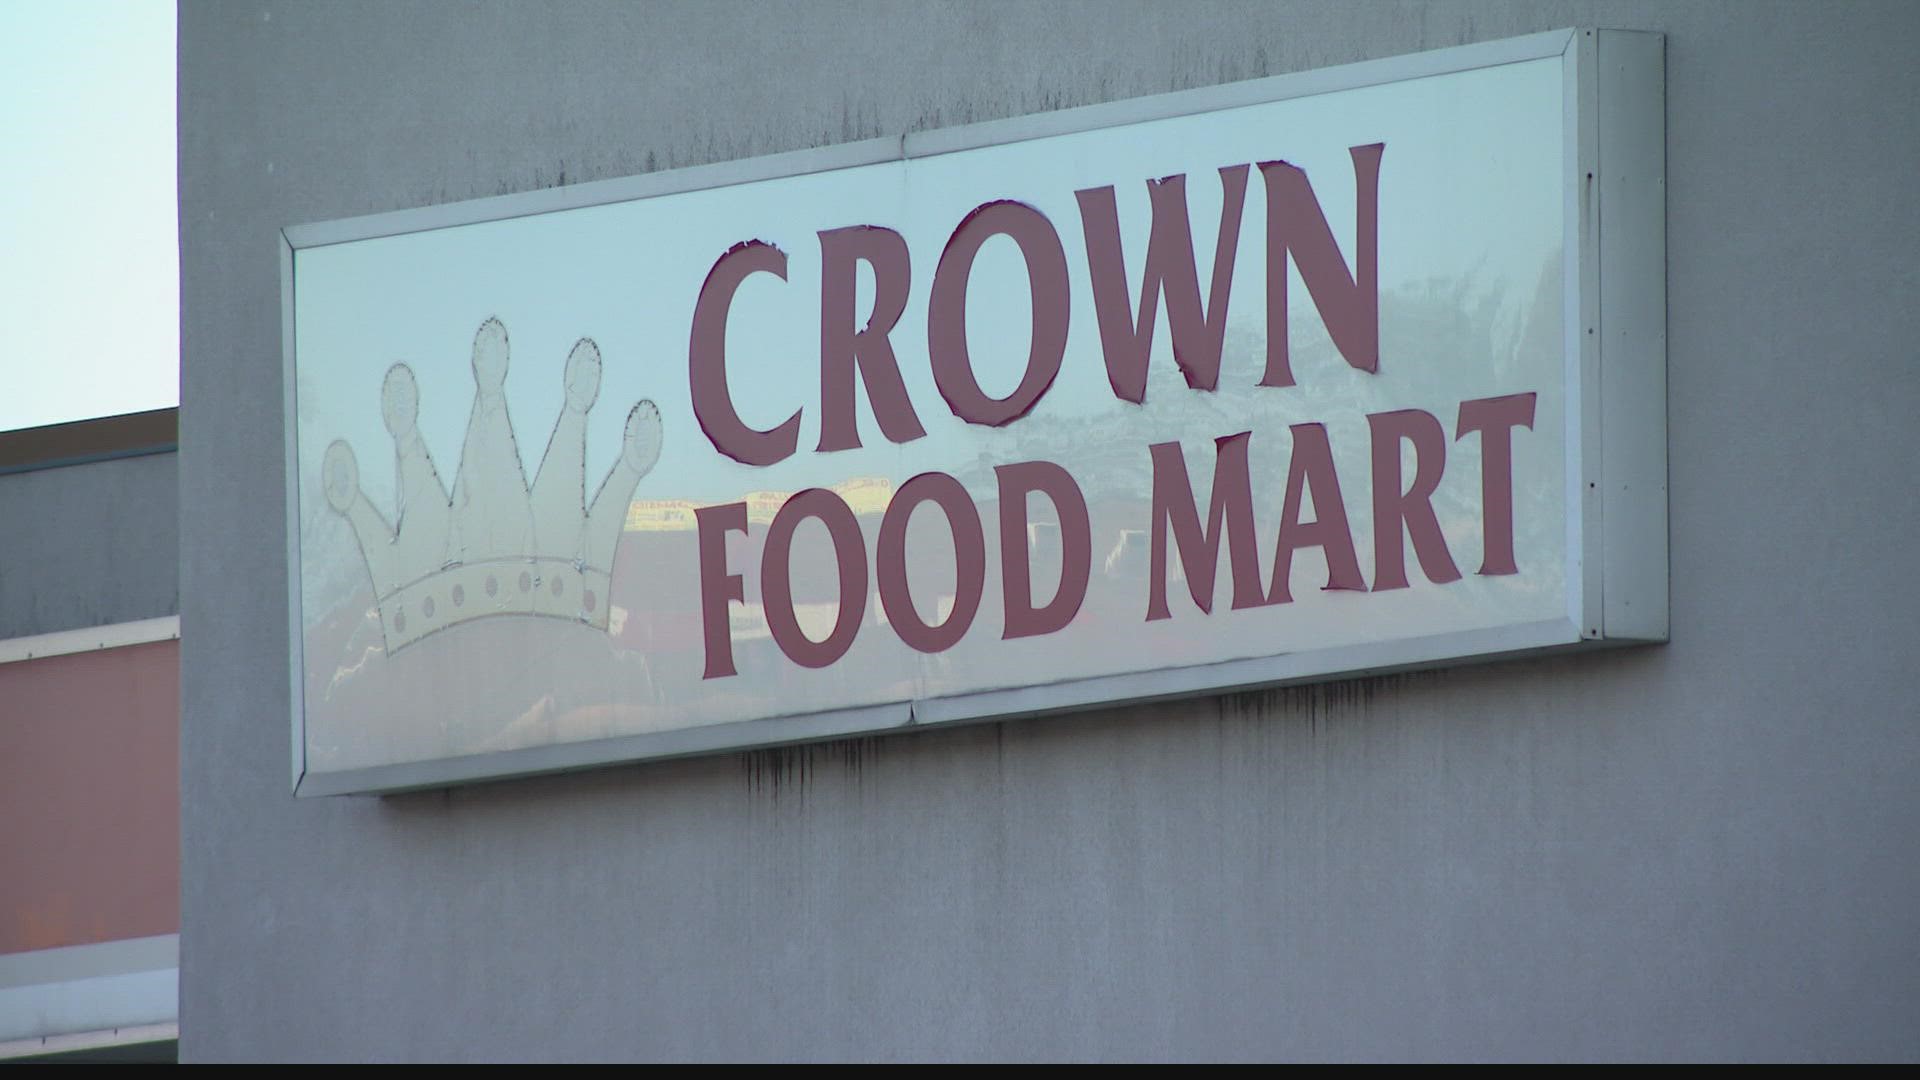 Quintell Harris, 36, was found shot to death at the Crown Food Mart Phillips 66 on Natural Bridge Avenue.